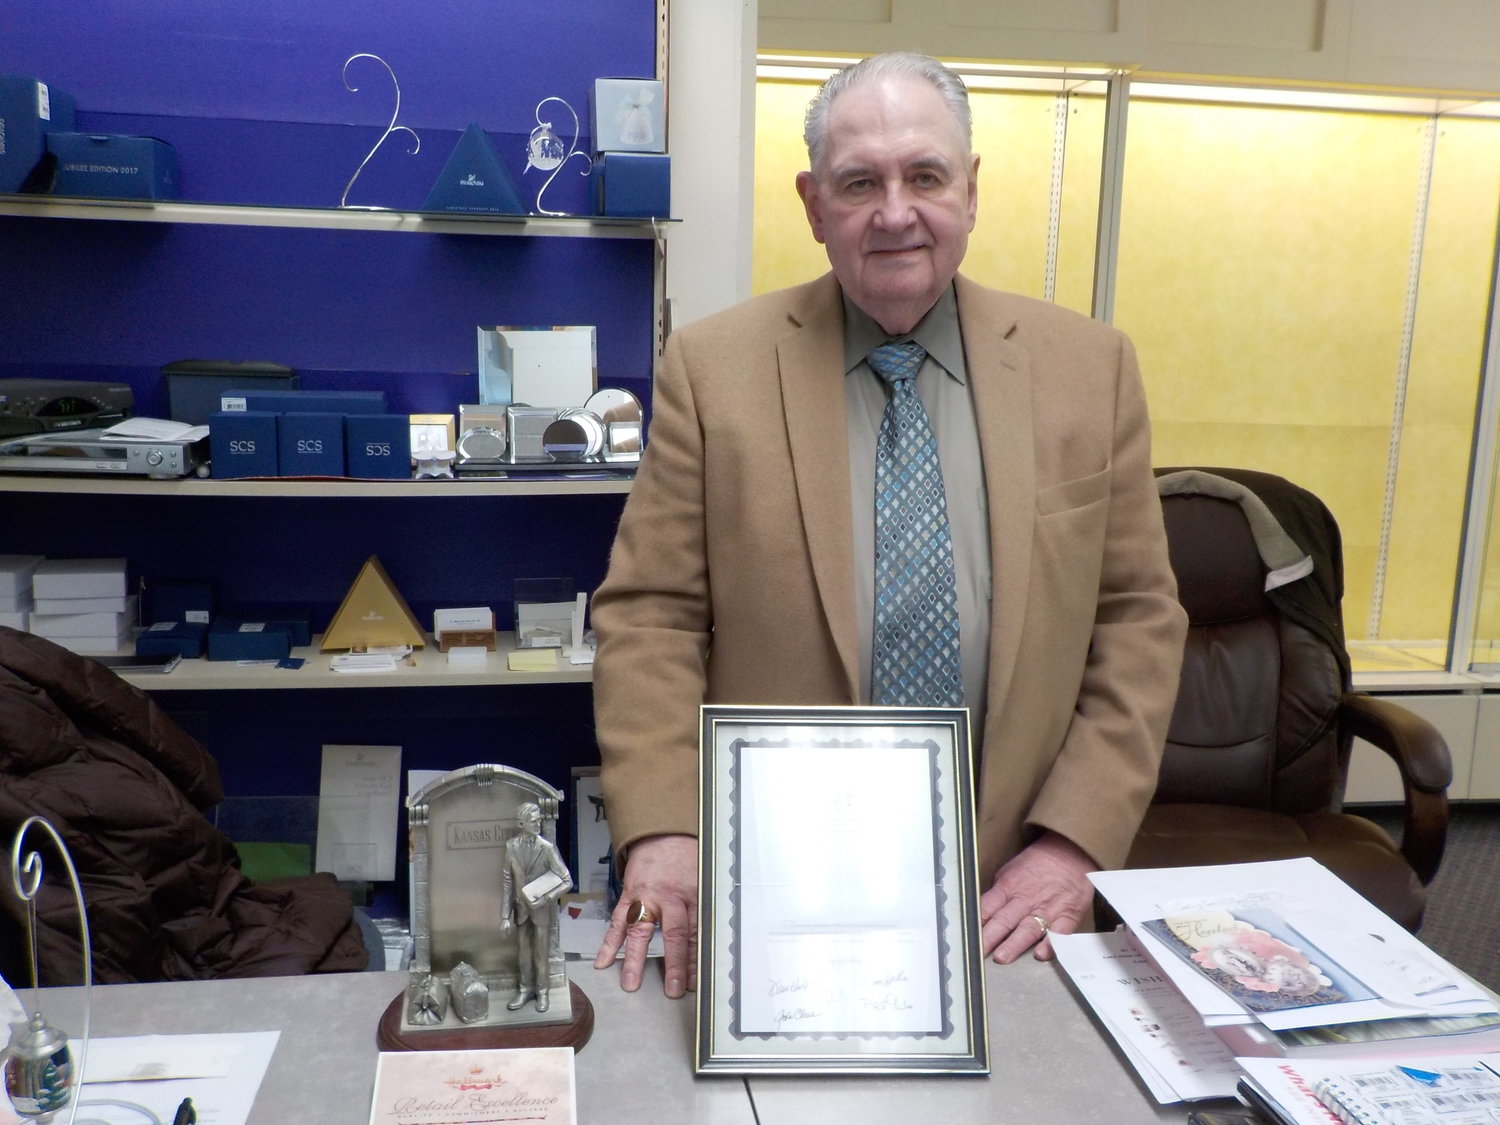 Gaylor displayed documents and awards that the Lyn Gift Shop had earned over the years for excellence in retail as a Hallmark store. He died on Nov. 28 at 79, but leaves behind a legacy in the village.